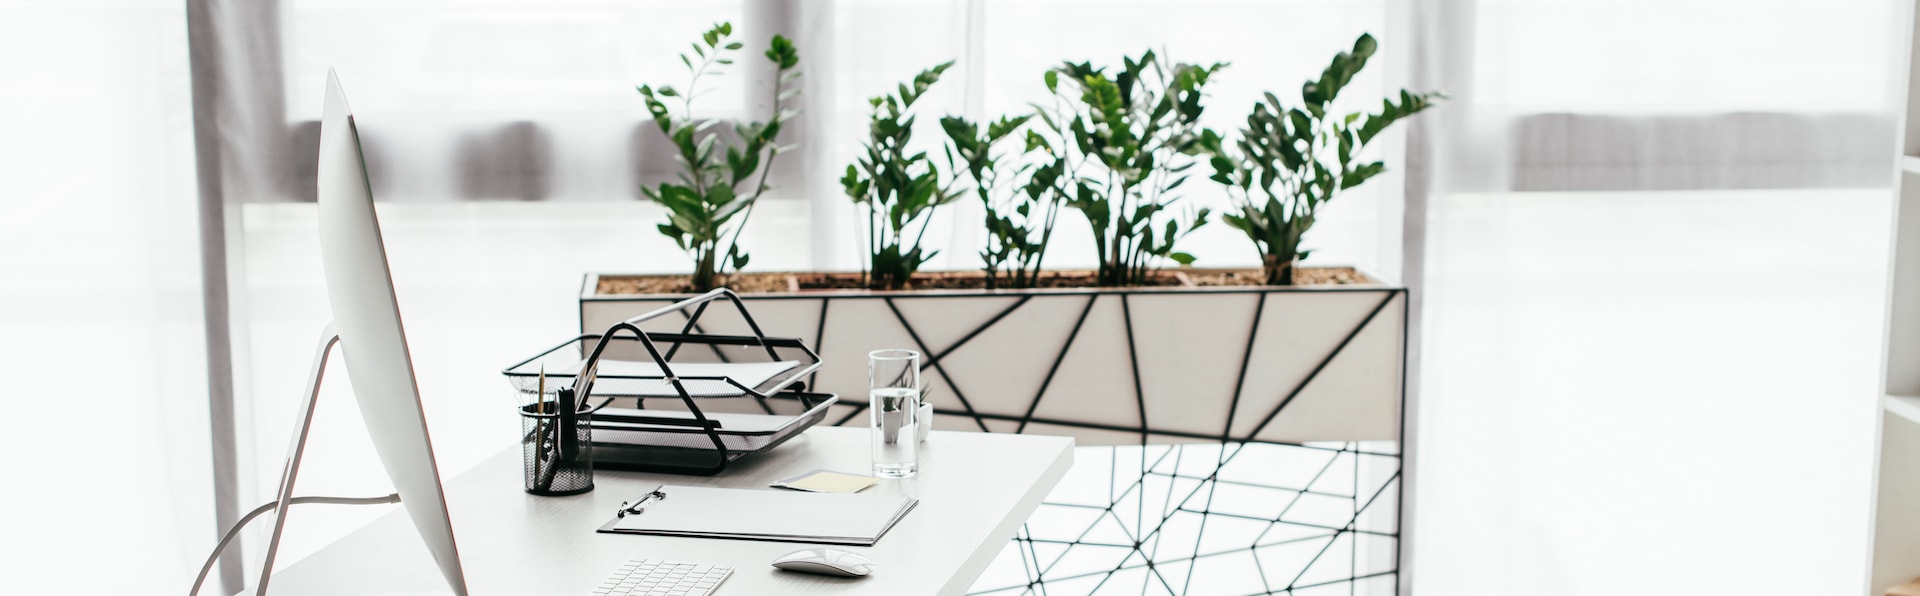 Are Plants Good for the Workplace? The Benefits of Plants in Your Office